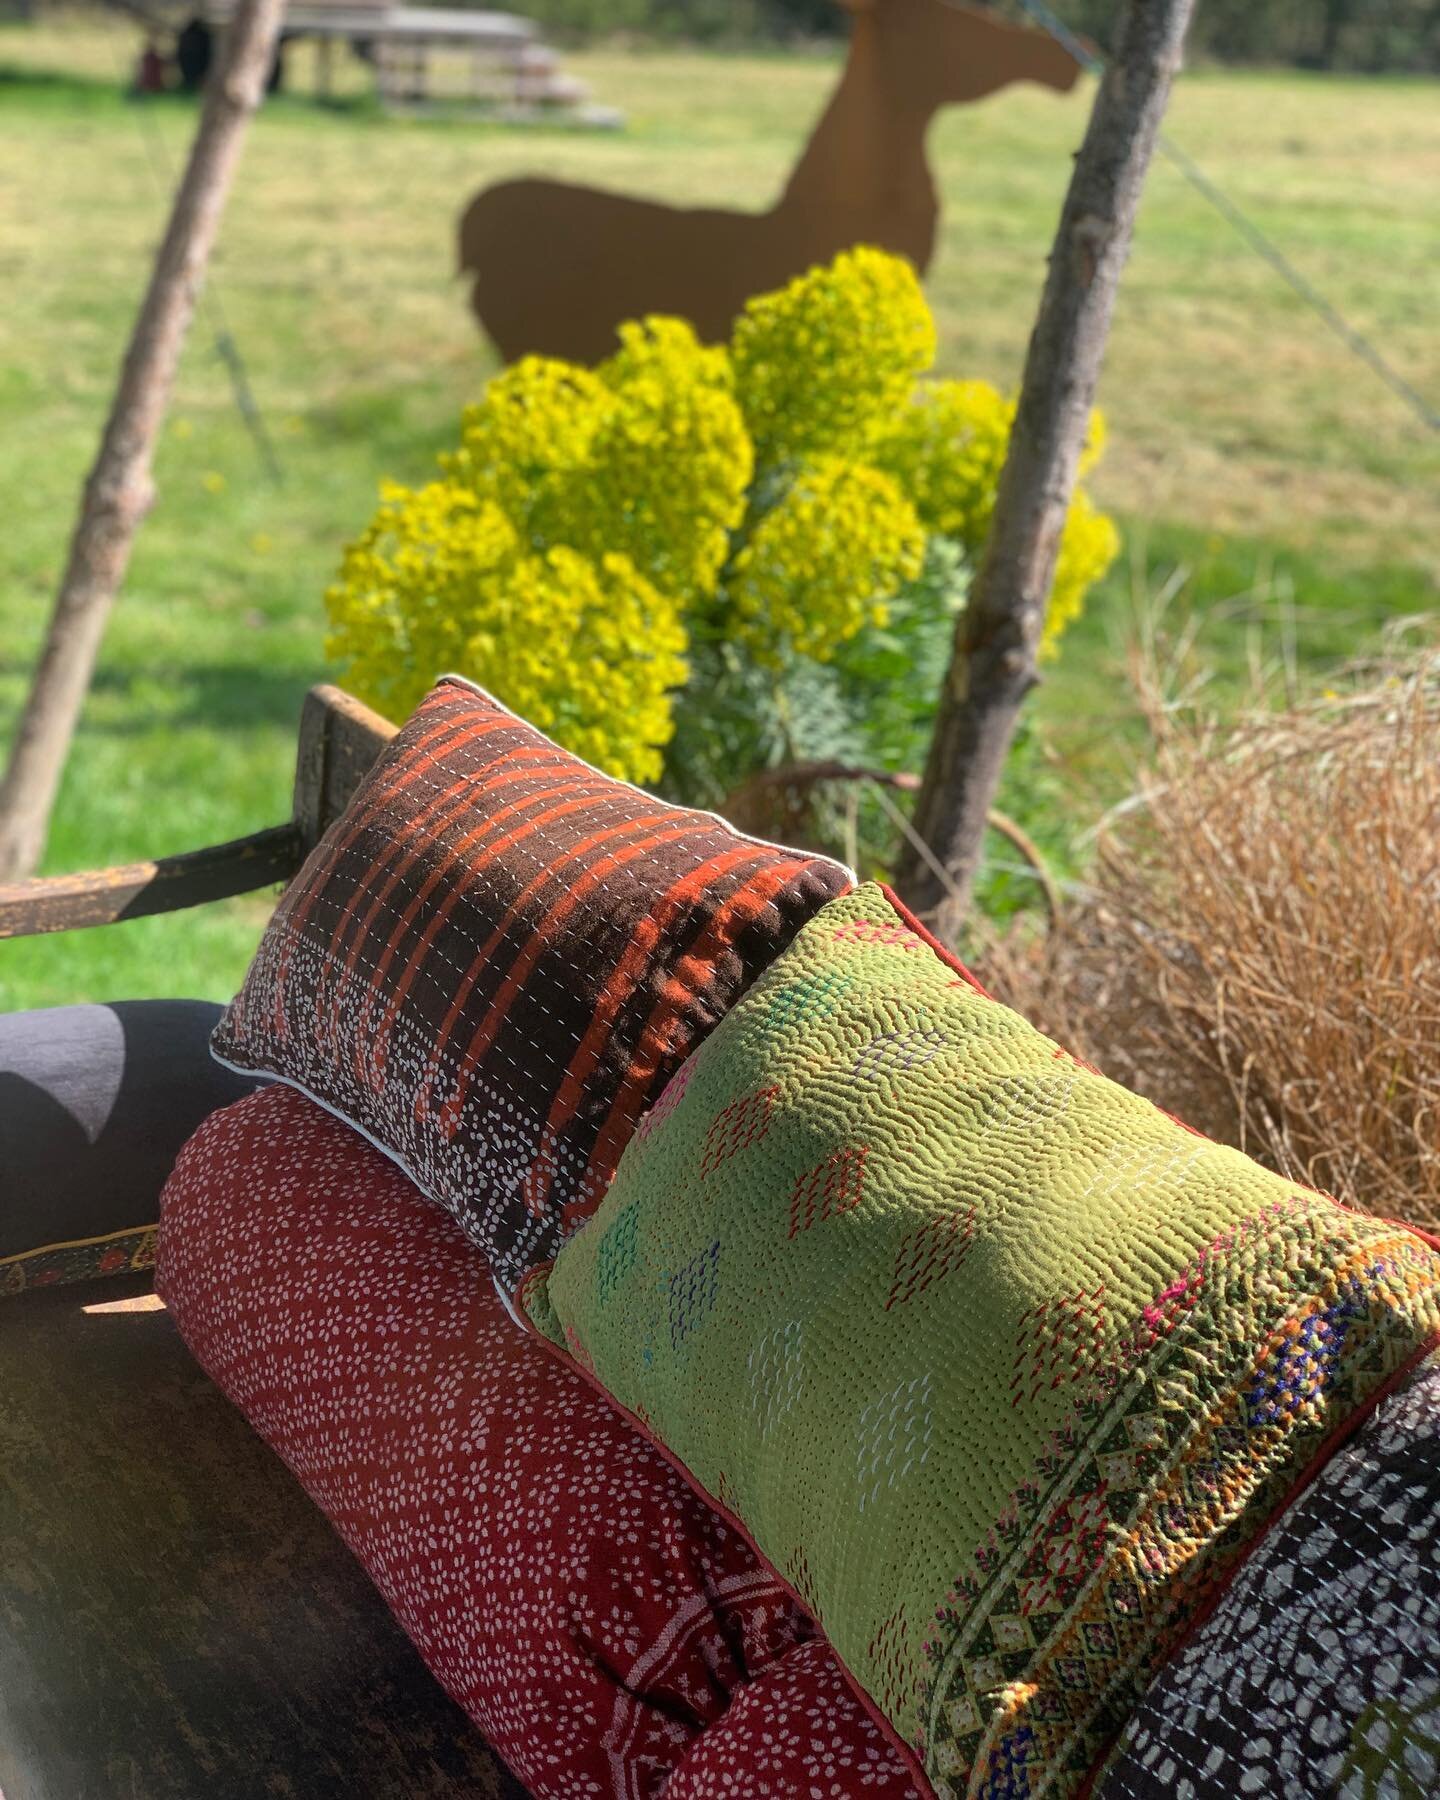 S P R I N G

o n &bull; t h e &bull; p r a i r i e 

With the canvas canopy up again over the decked seating area and the euphorbias looking resplendent , it really is Springtime again on the Prairie.
And how gorgeous do these stunning cushions desig